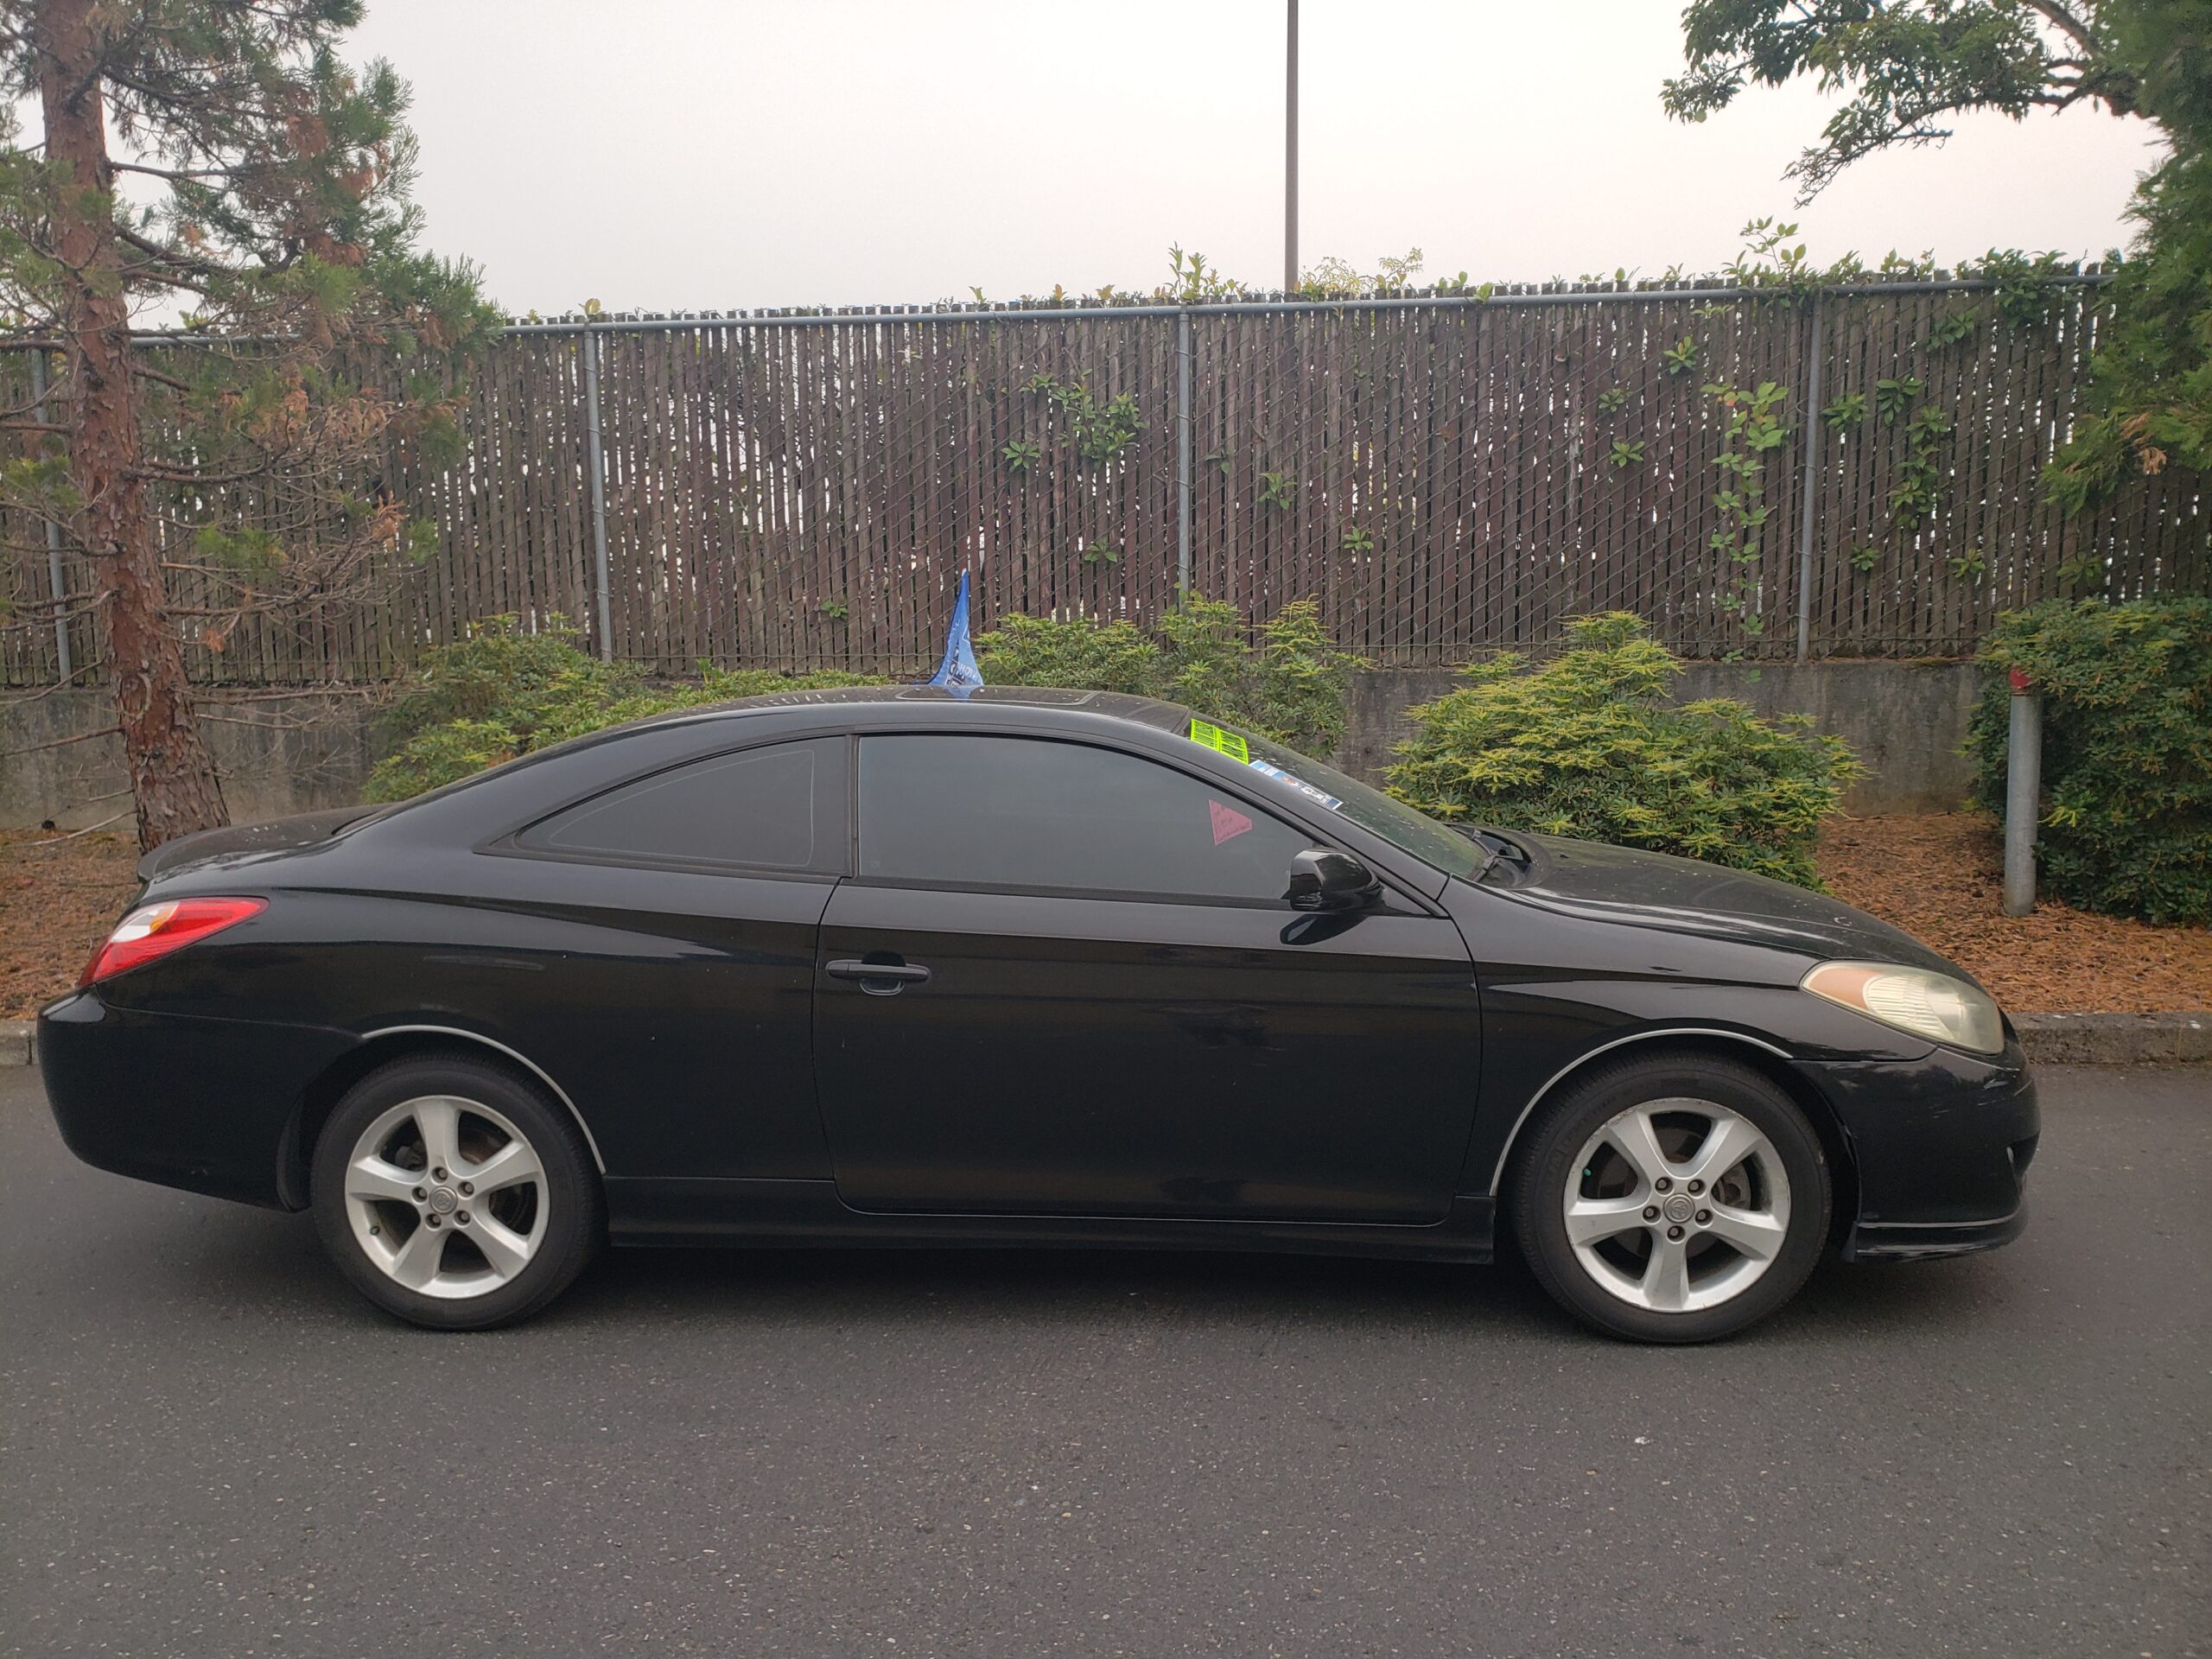 SMOKIN' HOT Deal~ 2004 Toyota Camry Solara COUPE SE Sport~155k!~ ANY Credit  - Top Auto Brokers